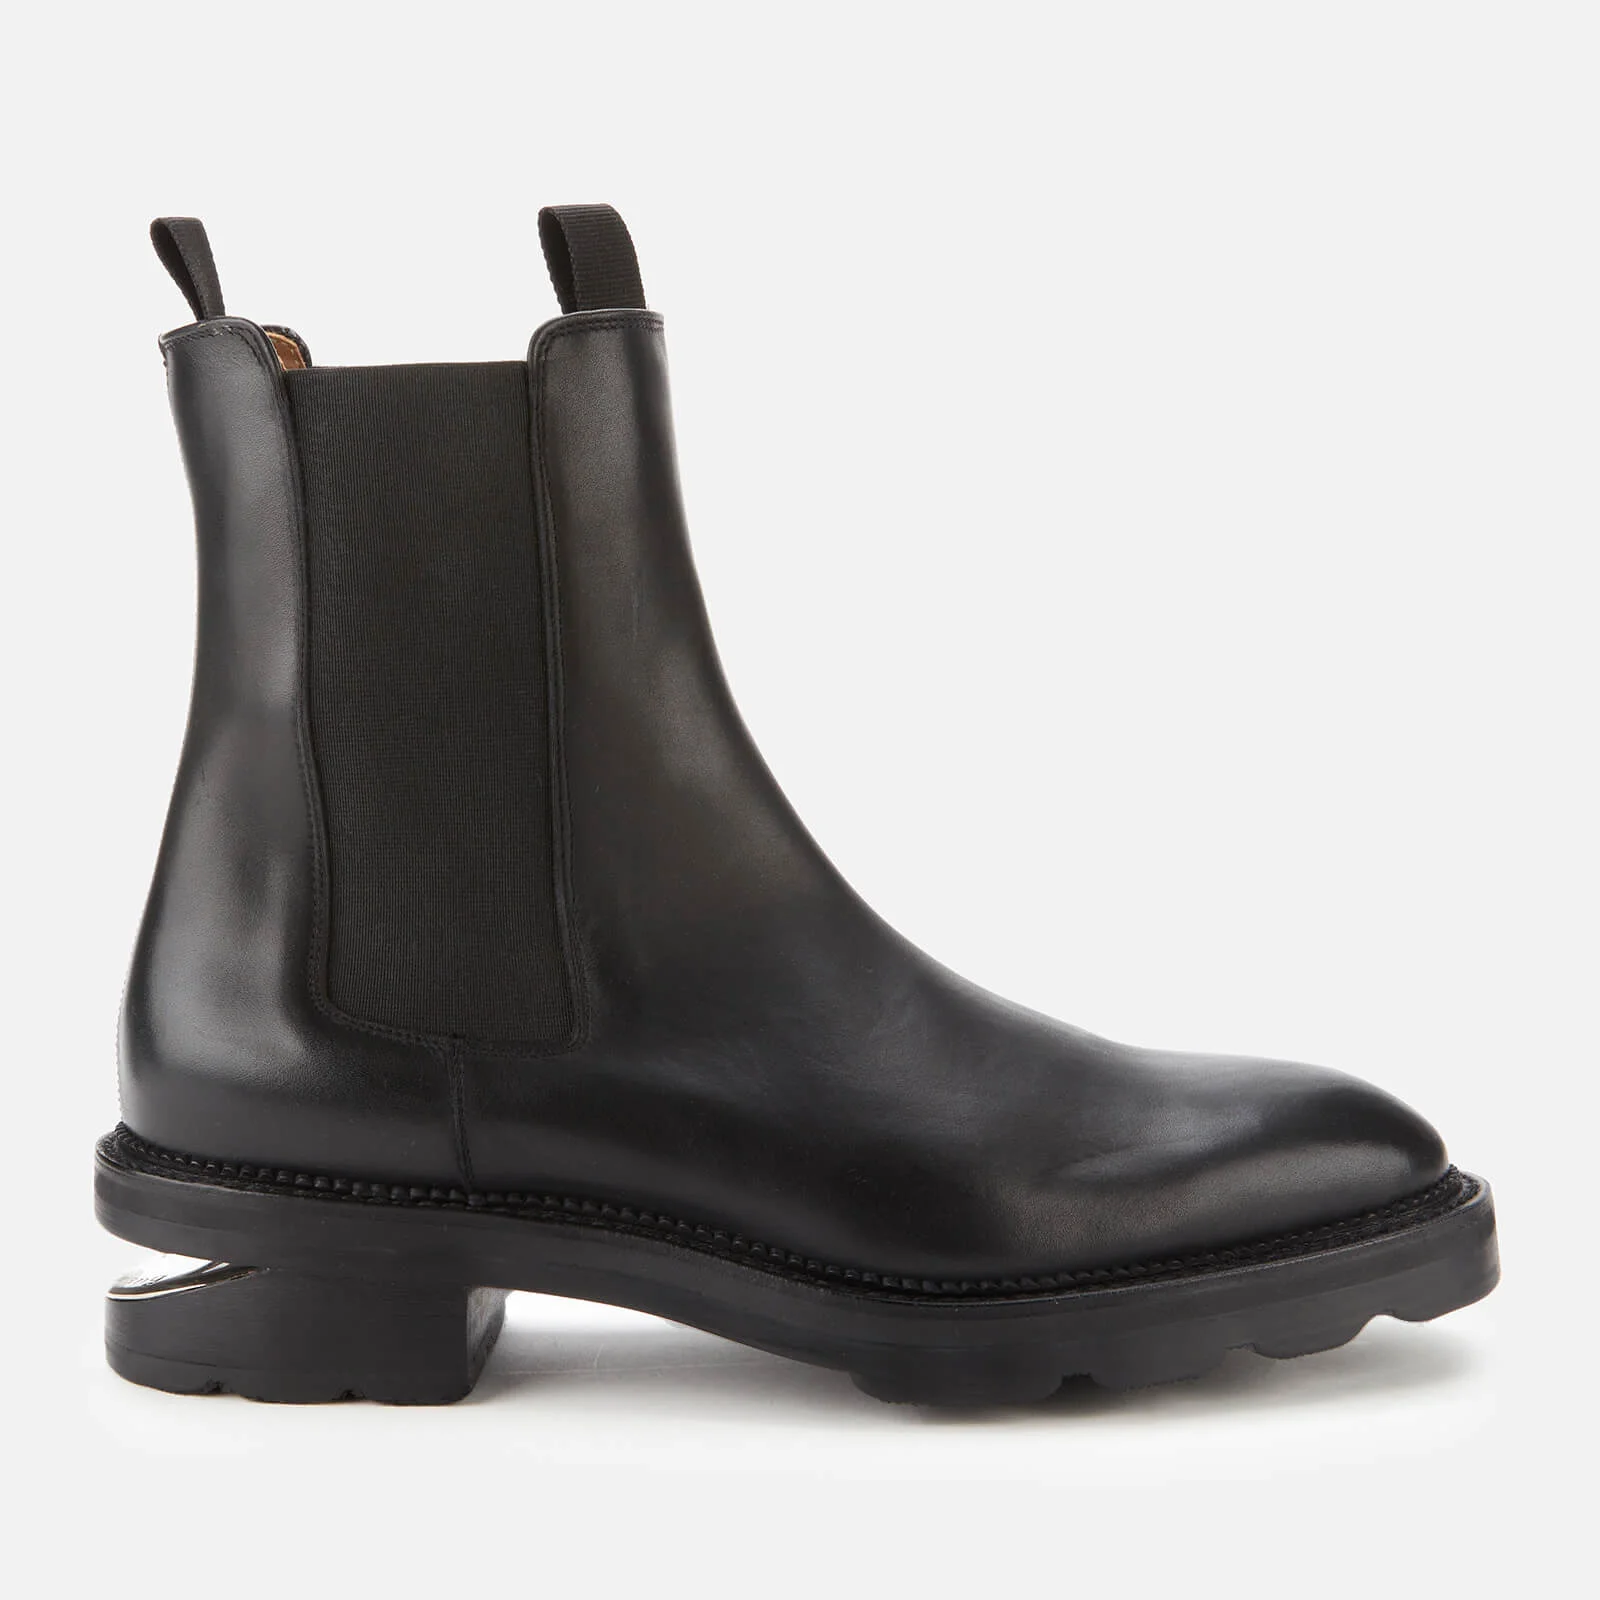 Alexander Wang Women's Andy Leather Chelsea Boots - Black Image 1